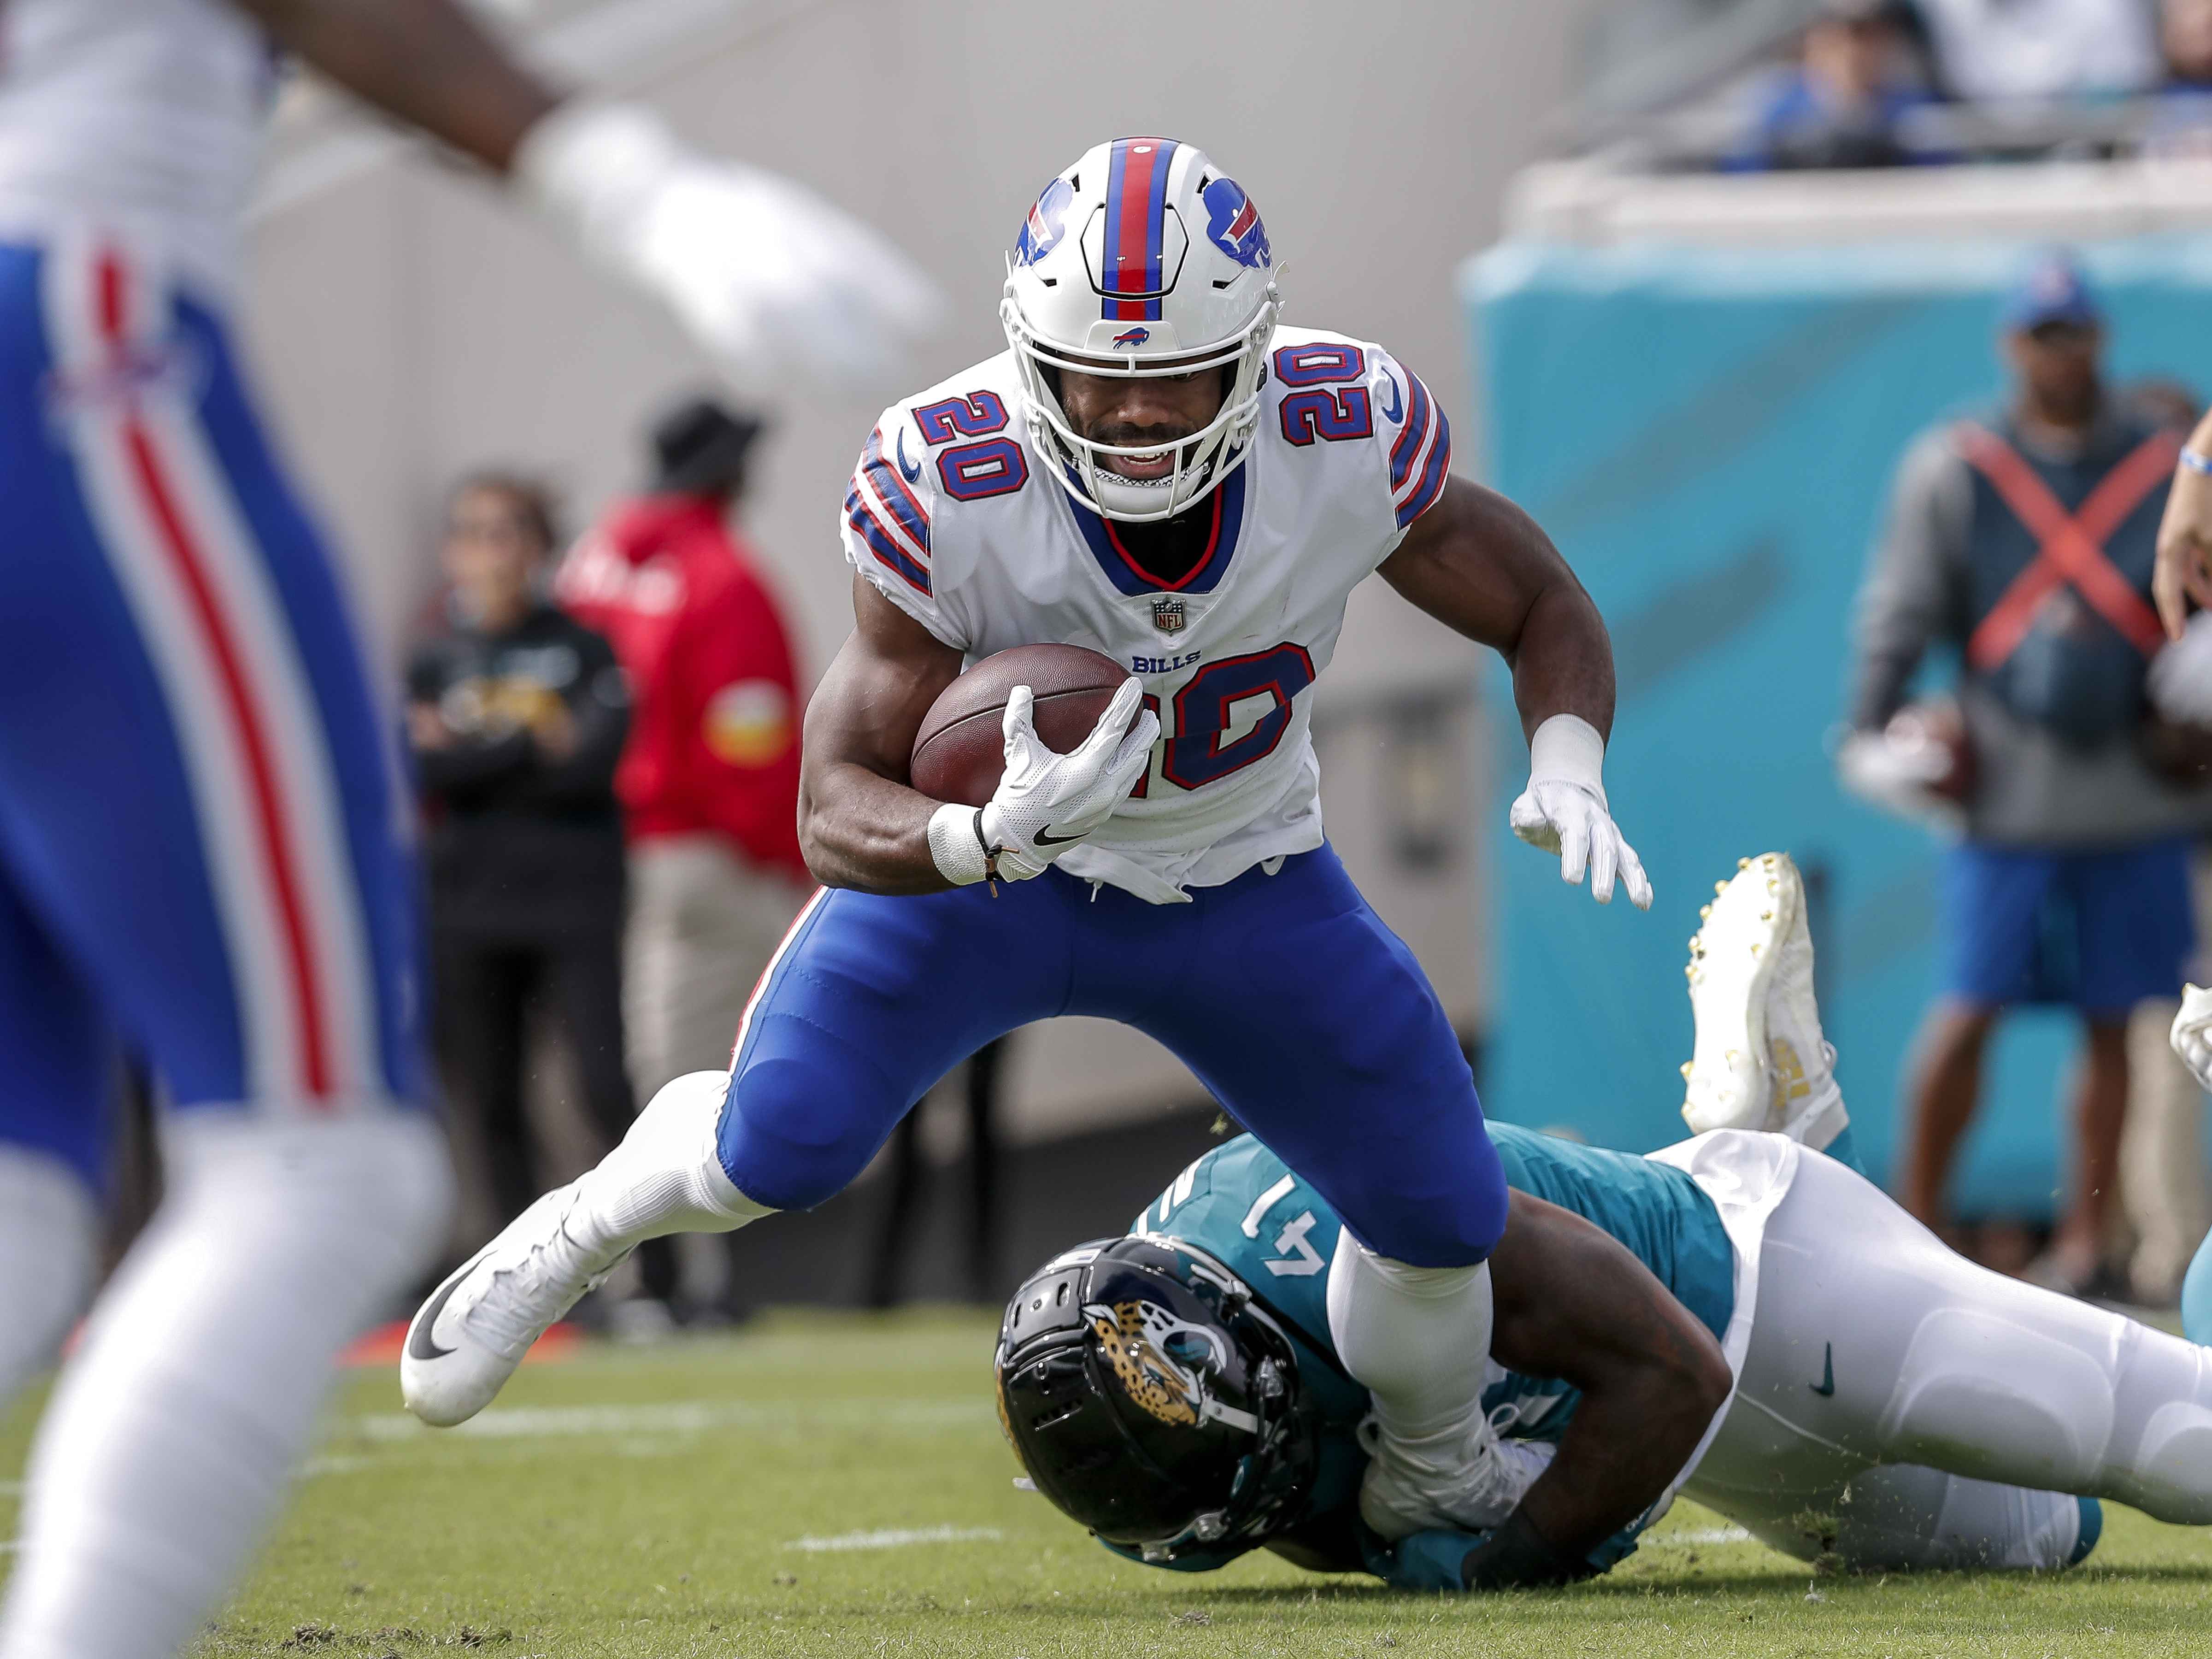 Running back Zack Moss #20 of the Buffalo Bills is tackled by the ankles by Linebacker Josh Allen #41 of the Jacksonville Jaguars during the game at TIAA Bank Field on November 7, 2021 in Jacksonville, Florida.